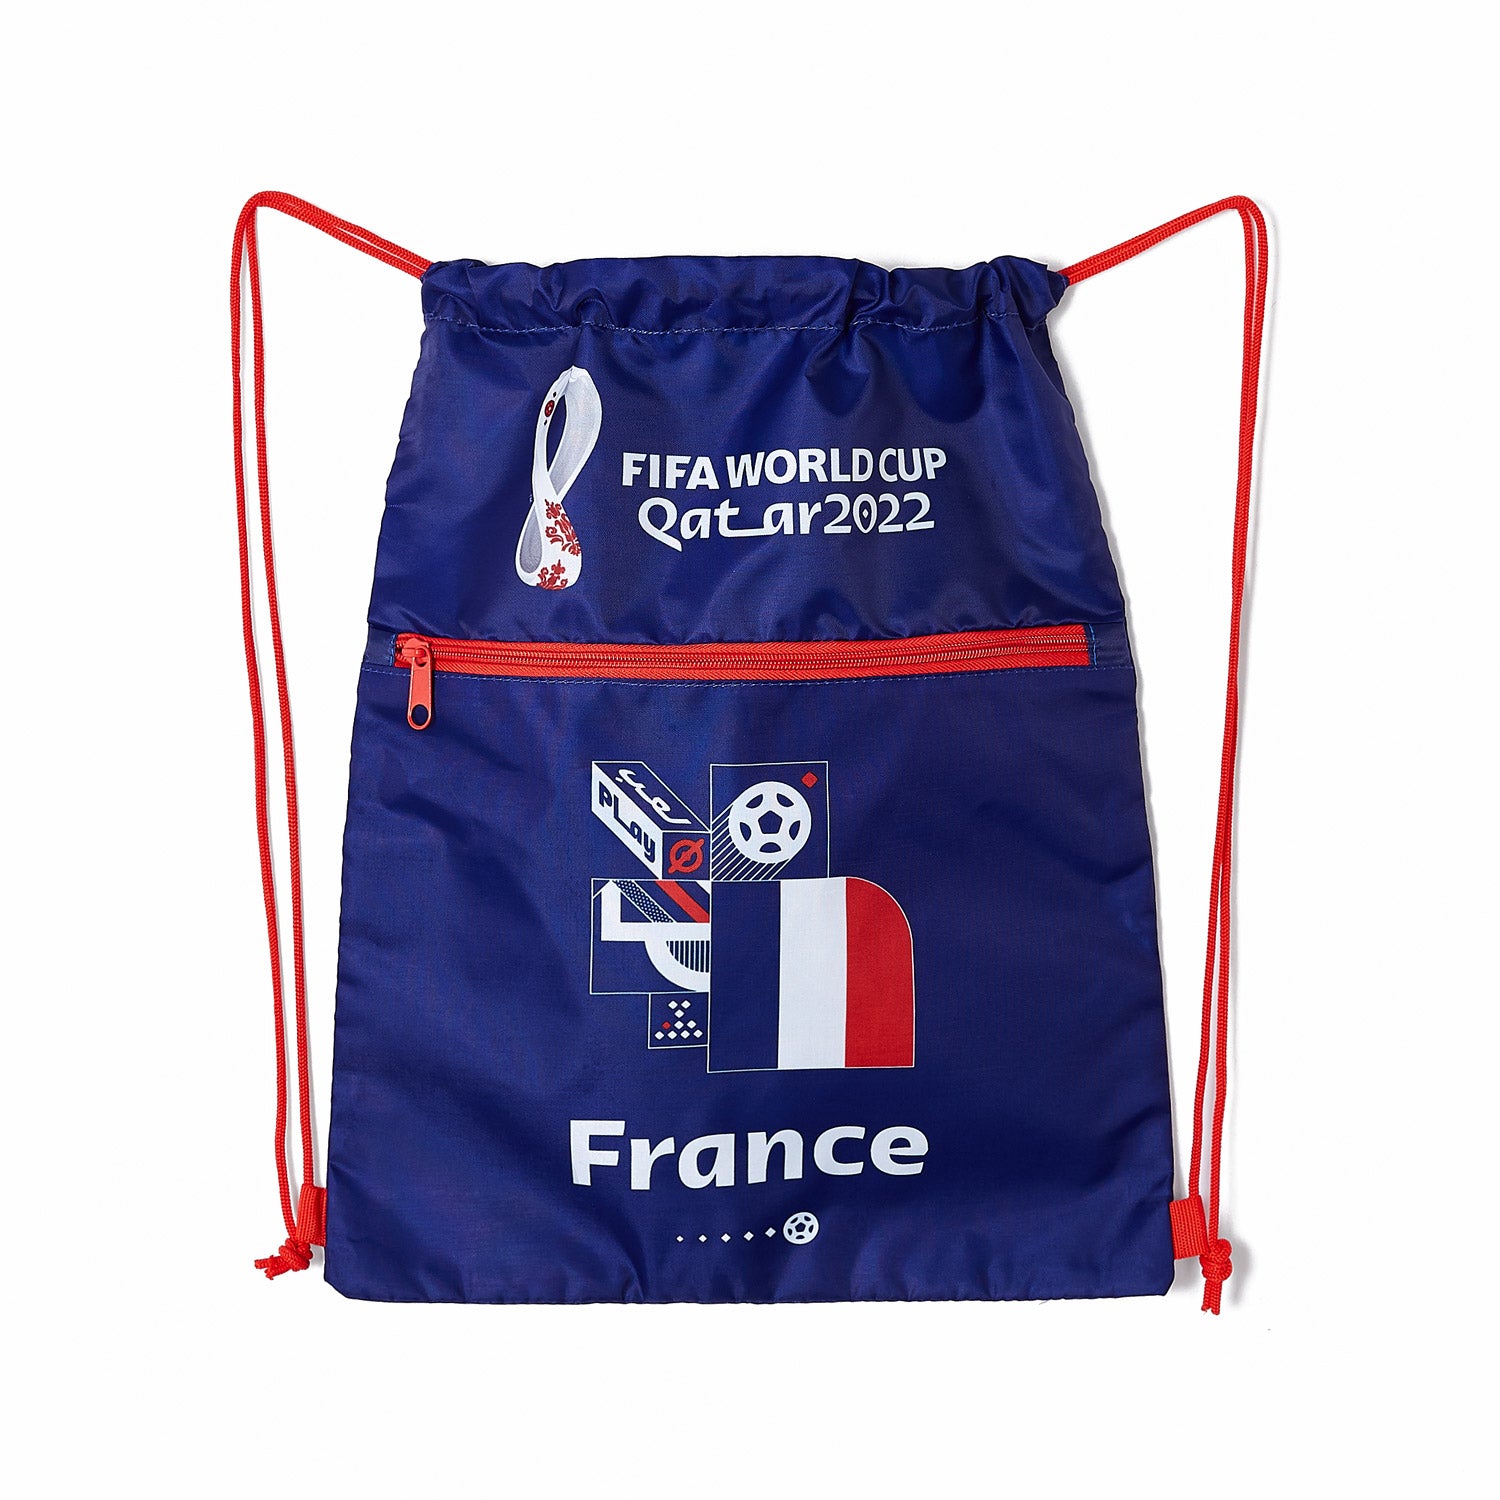 A LIMITED EDITION BLACK EPI LEATHER FIFA WORLD CUP APOLLO BACKPACK WITH  SILVER HARDWARE, LOUIS VUITTON, 2018 | Christie's